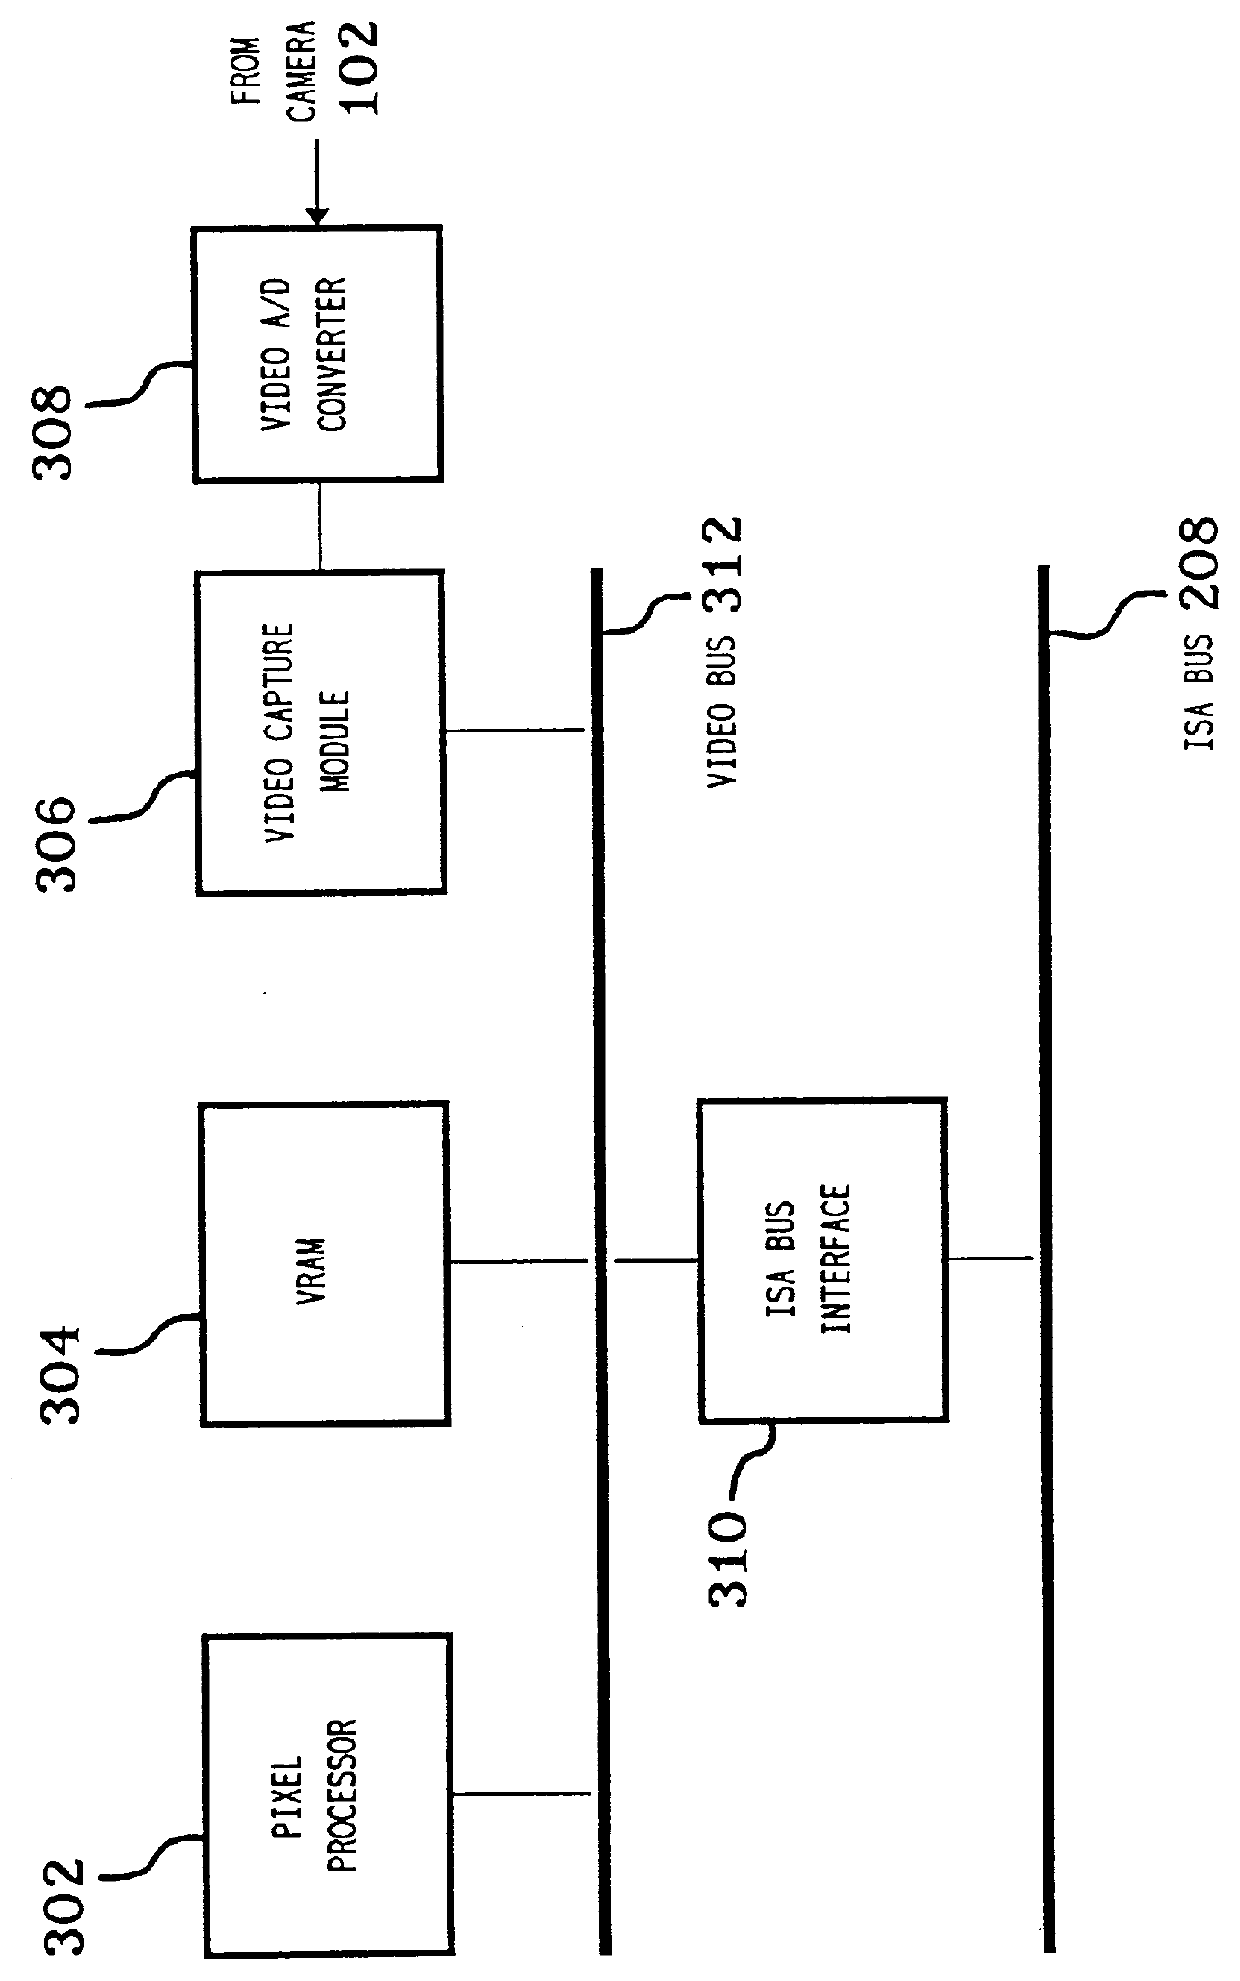 Communications subsystem for computer-based conferencing system using both ISDN B channels for transmission